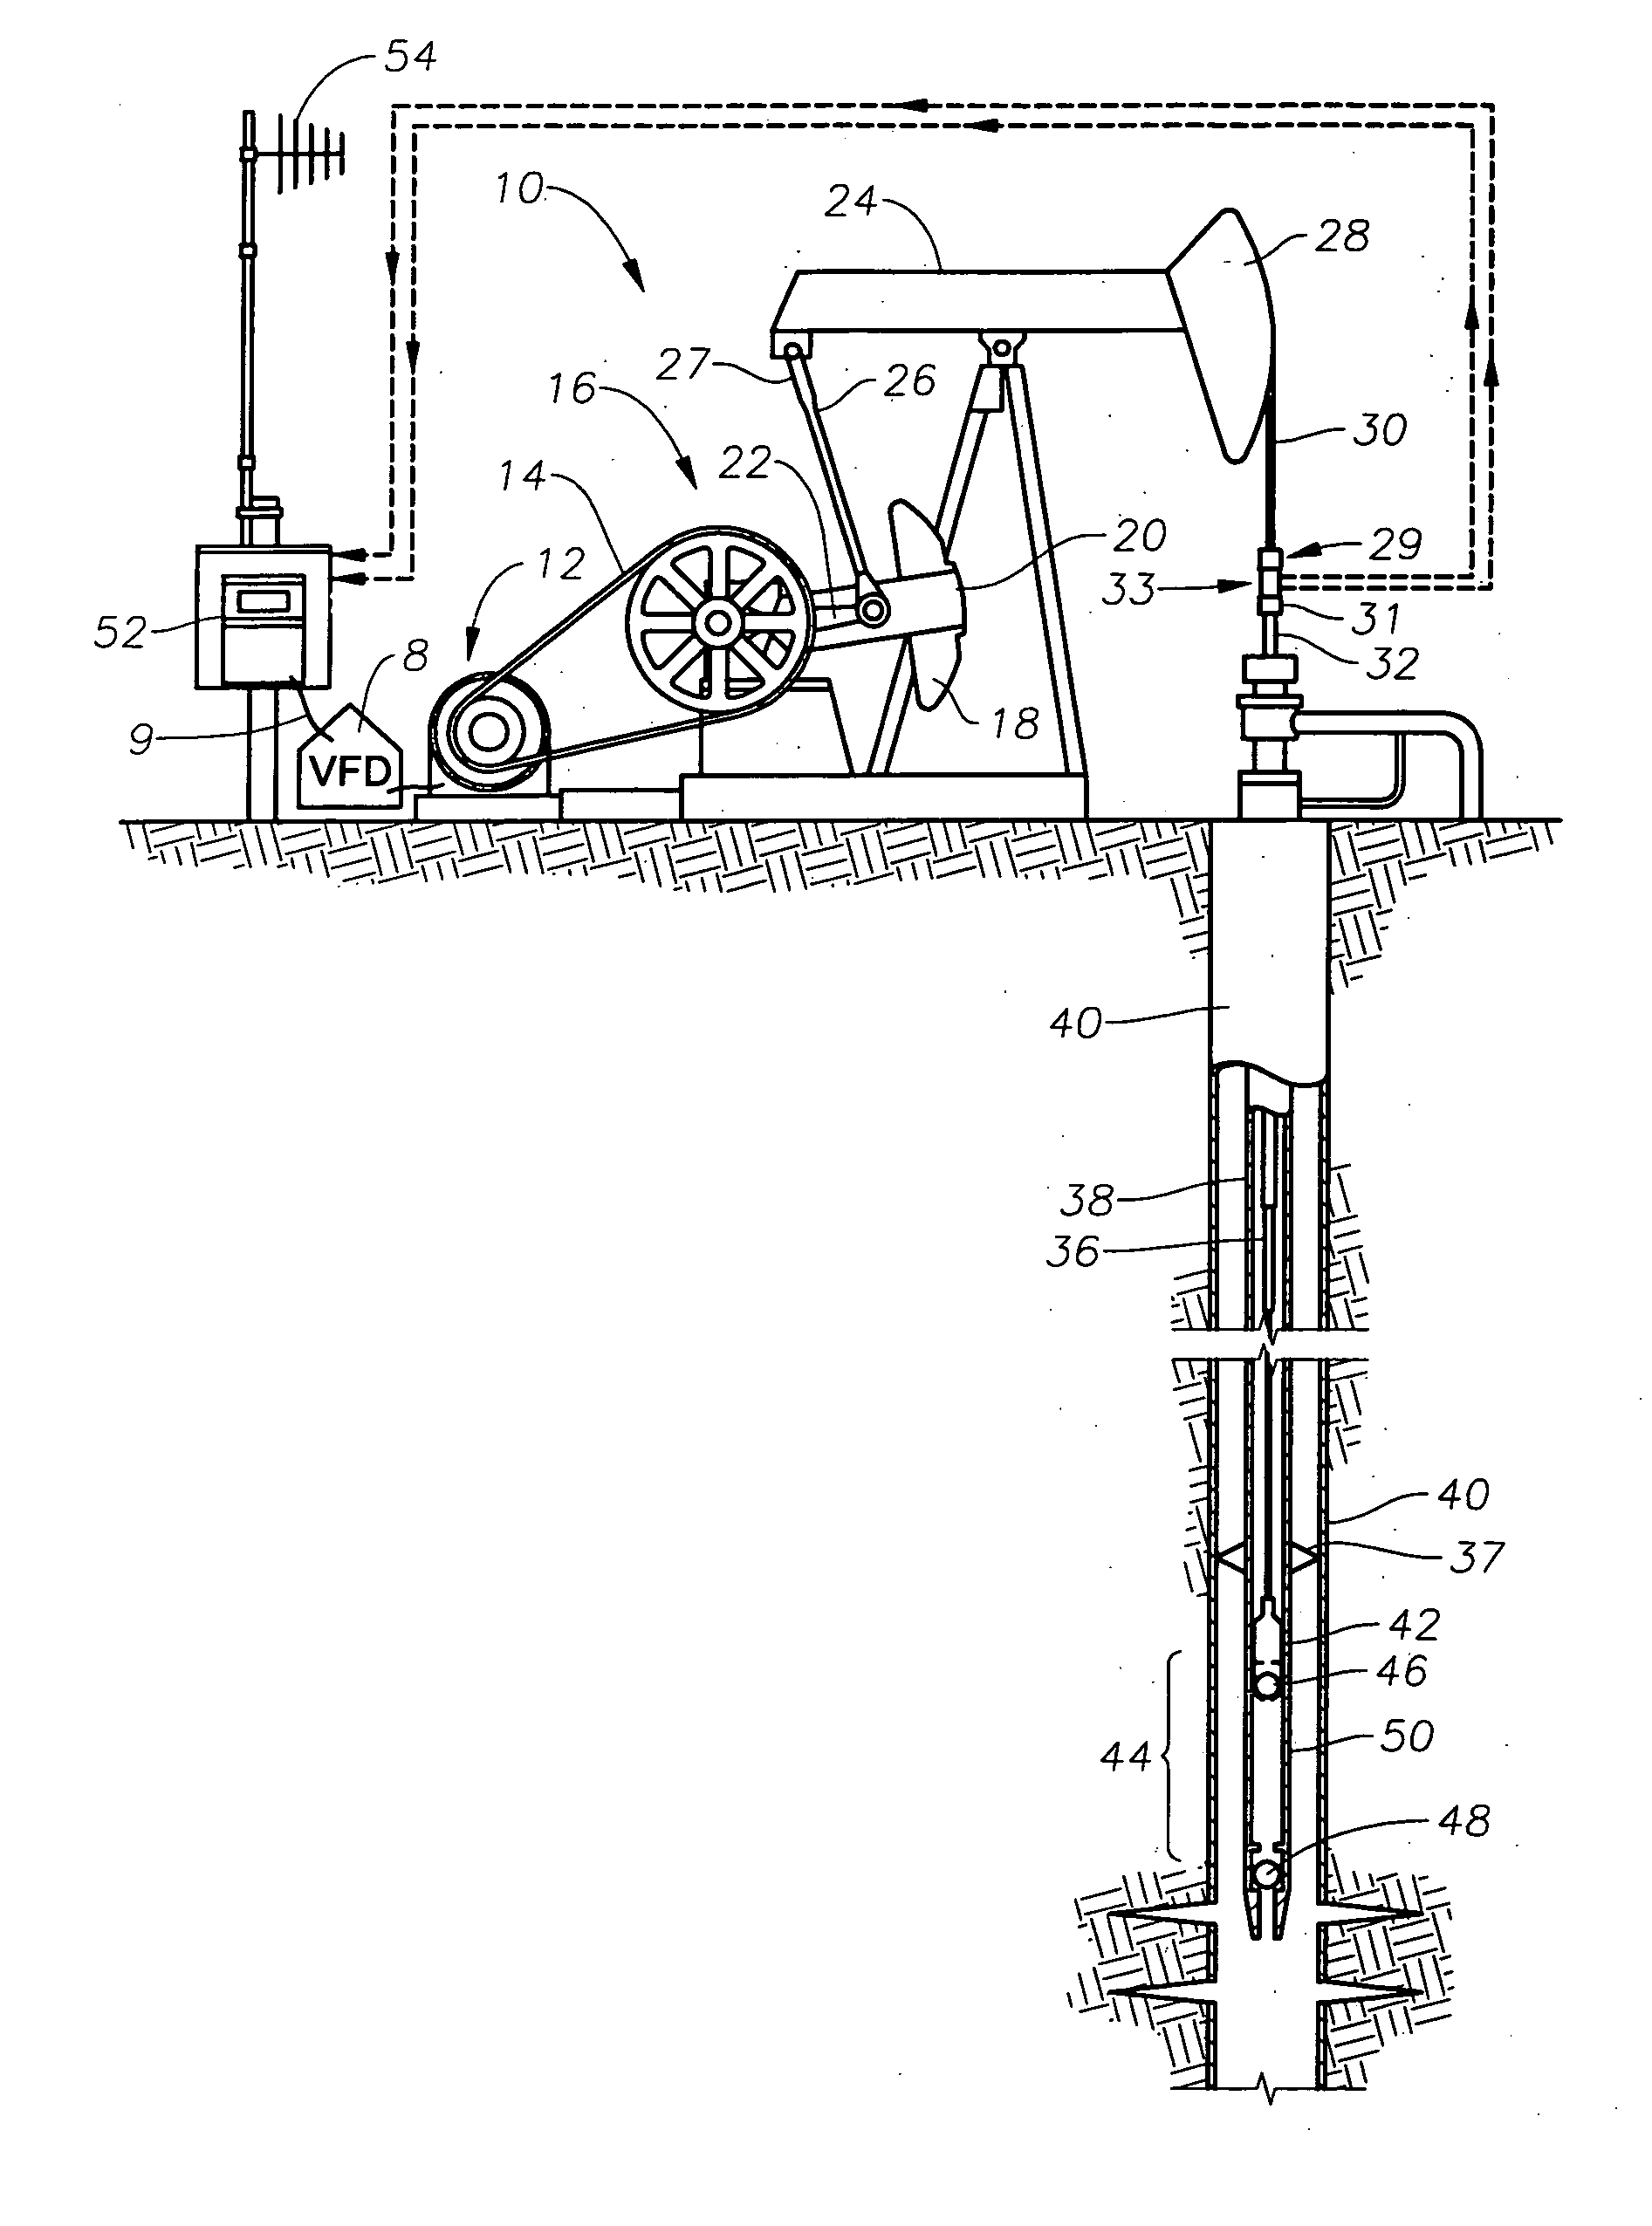 Method for mitigating rod float in rod pumped wells